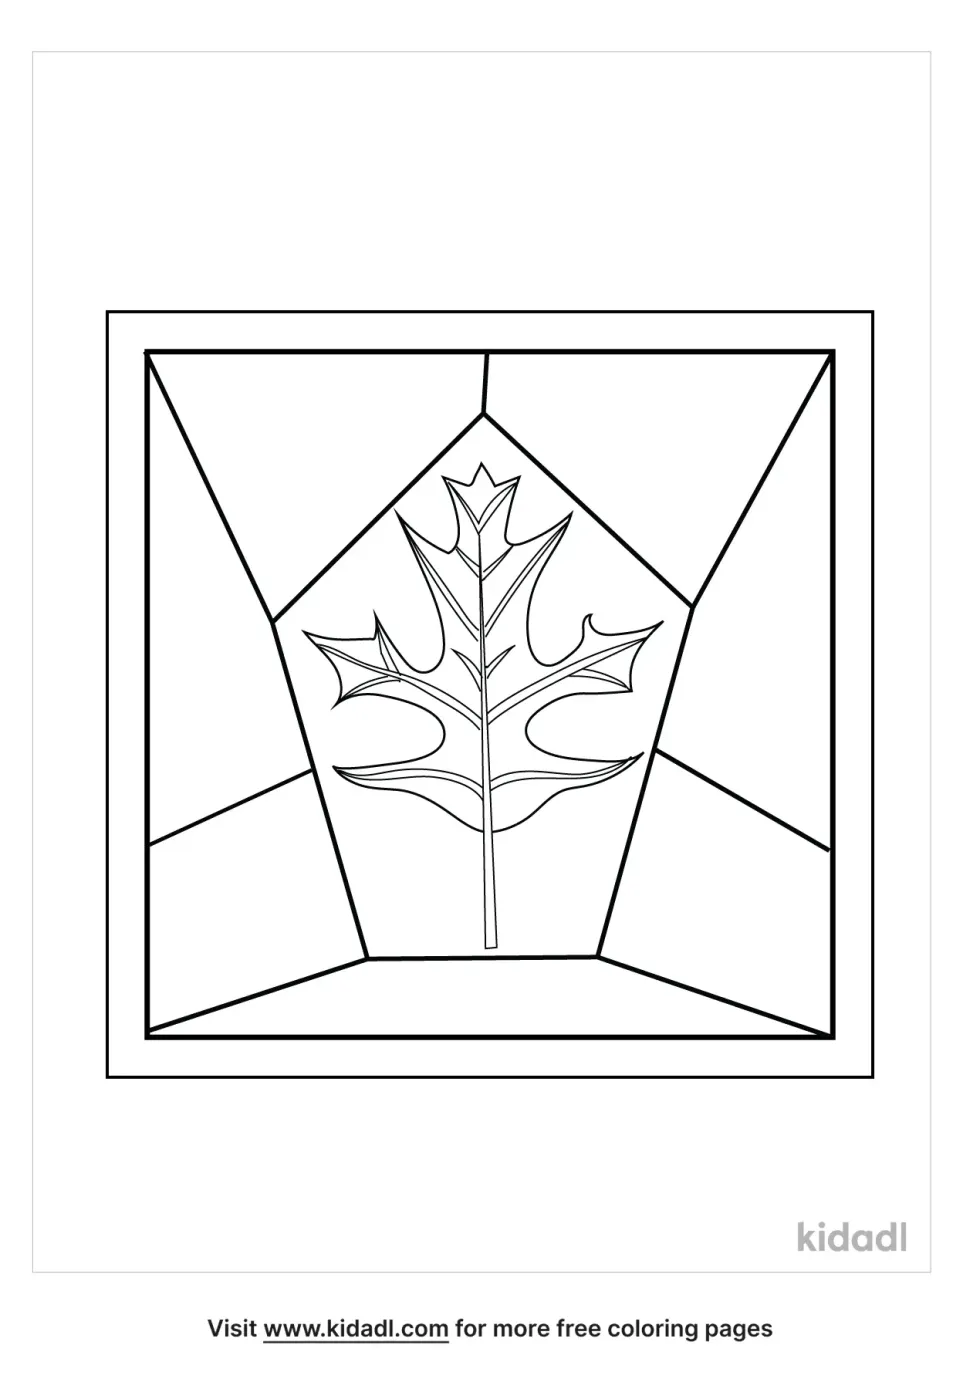 Oak Leaf Stained Glass Coloring Page